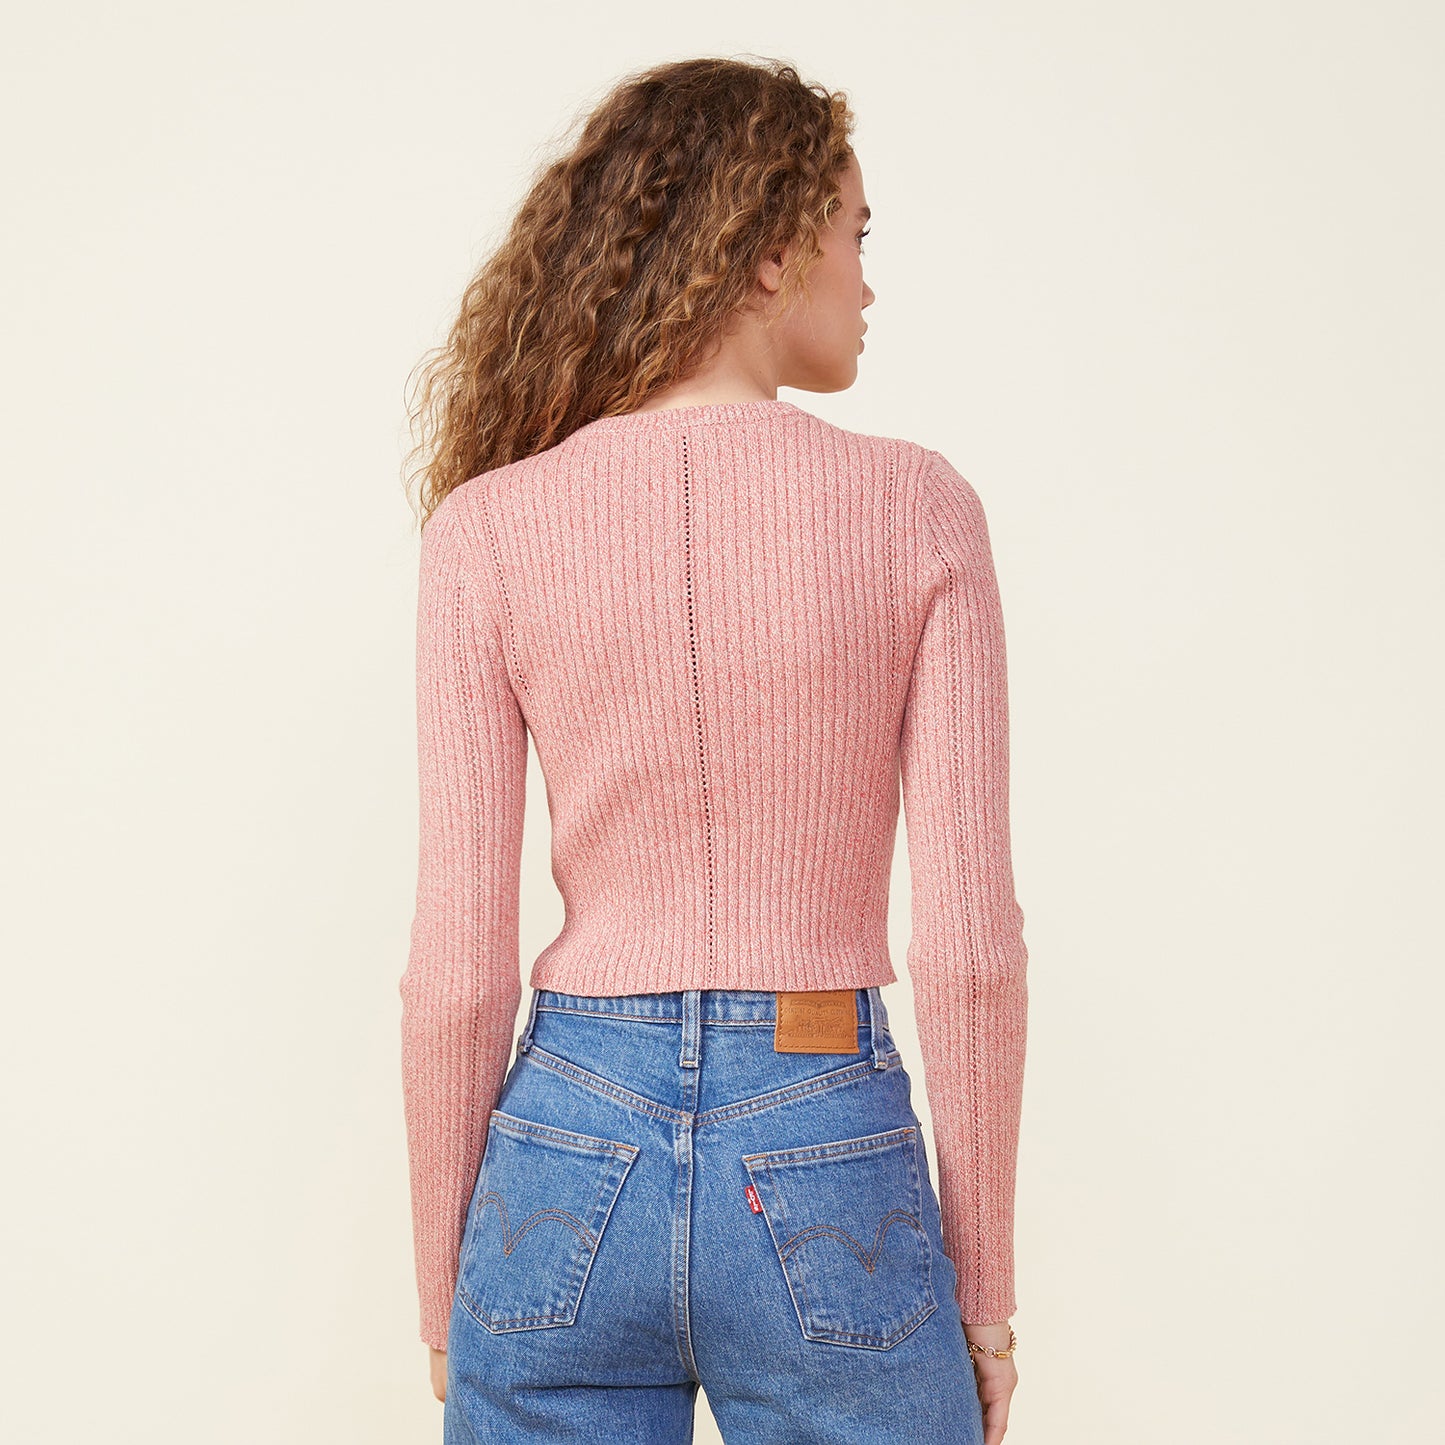 Back view of model wearing the marled sweater long sleeve top in nest.